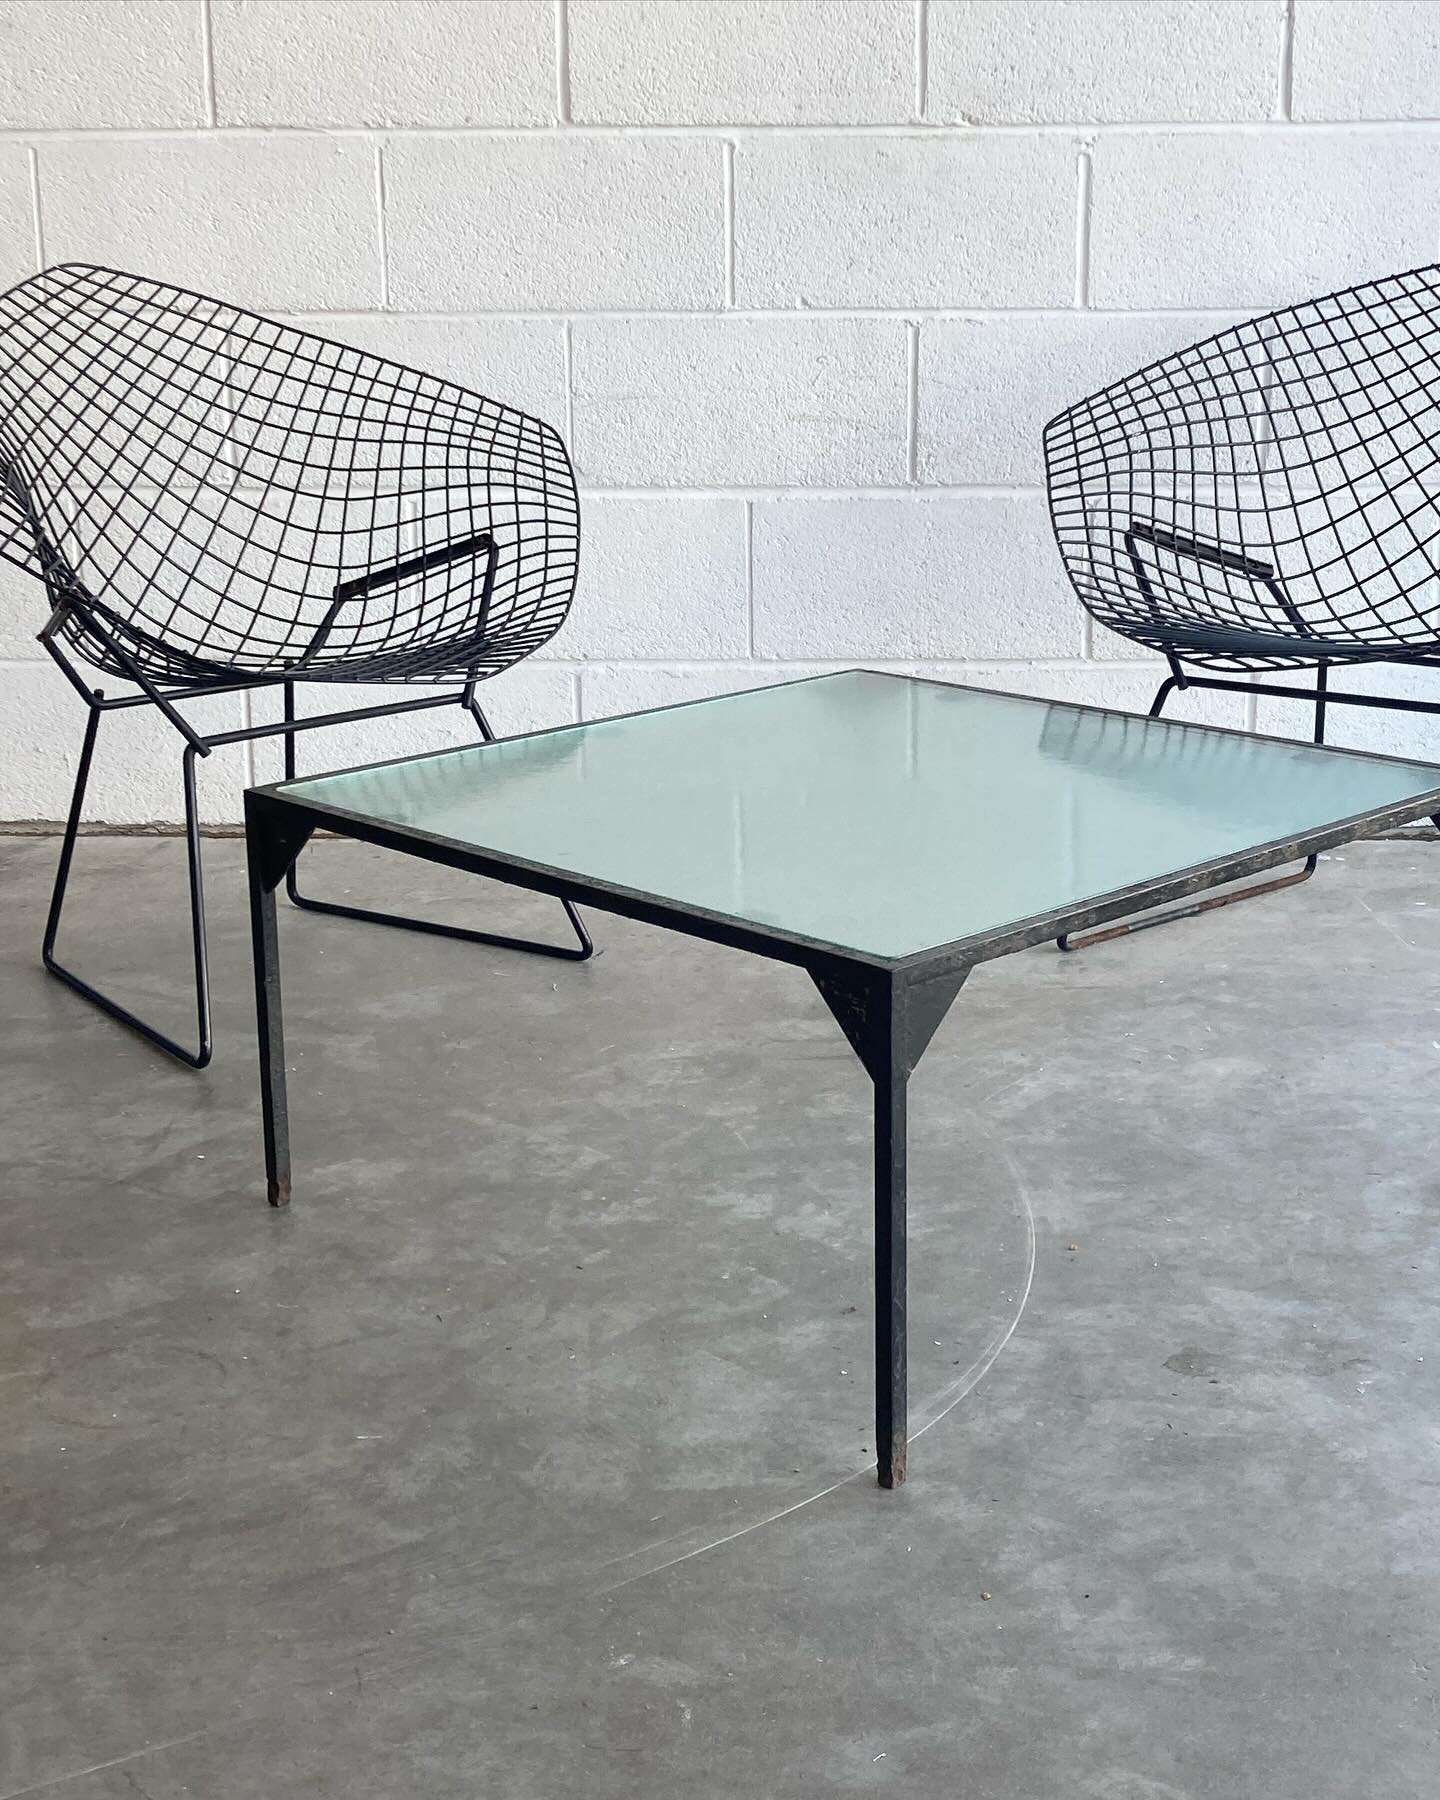 Iron and dappled glass garden table, 1950s. This came from the home of a well-known British architect. 

It&rsquo;s a raw and quite basic design, I suspect a one-off homemade build. There is lots of wear to the paint finish where it has spent years o